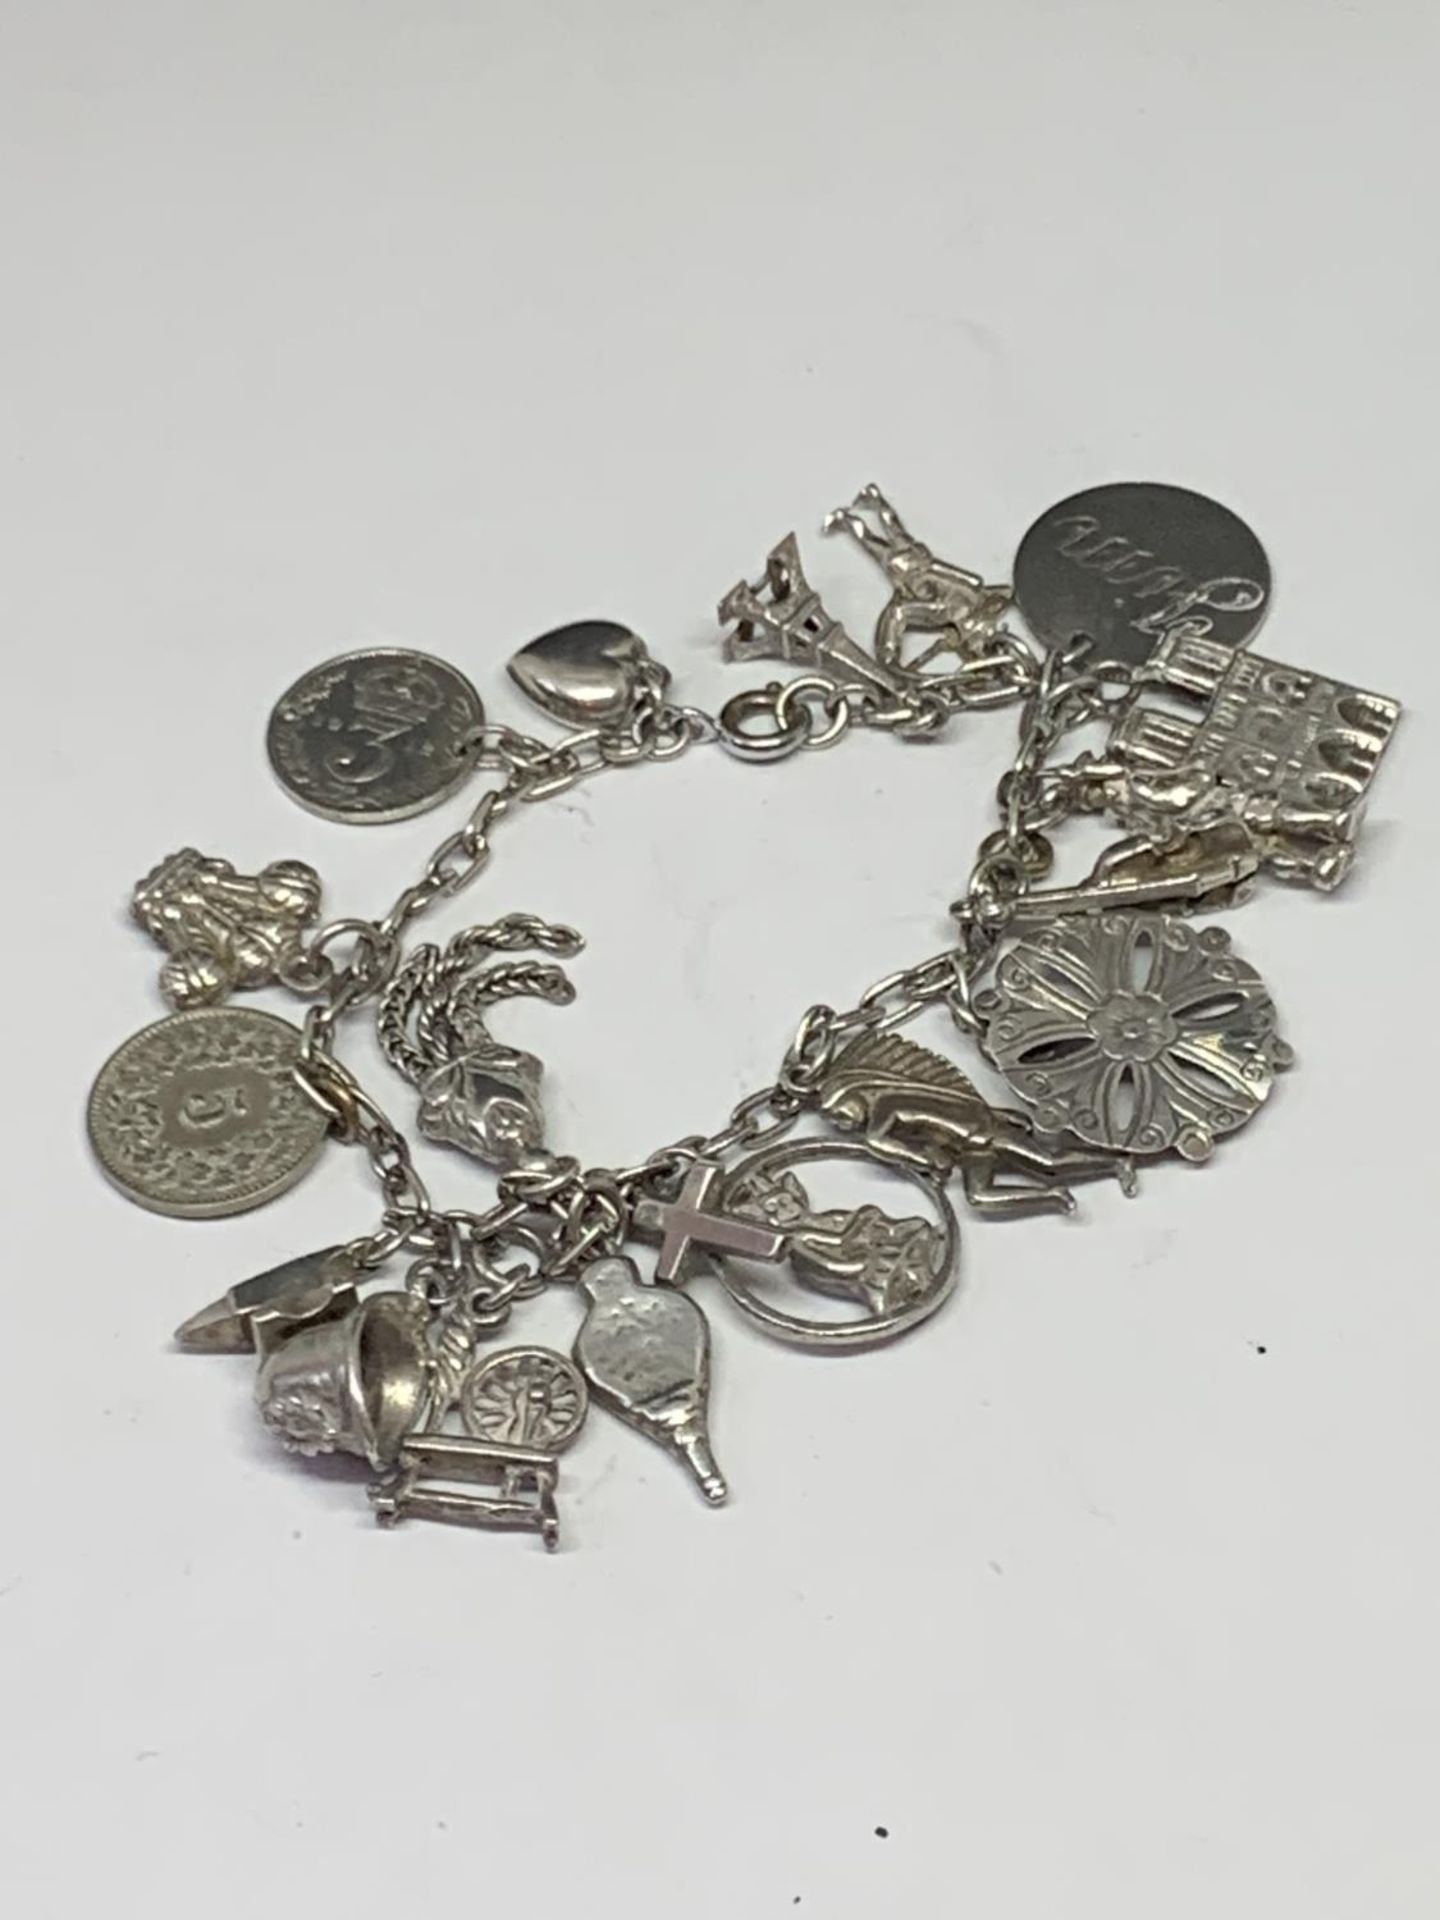 A SILVER CHARM BRACELET WITH NINETEEN CHARMS